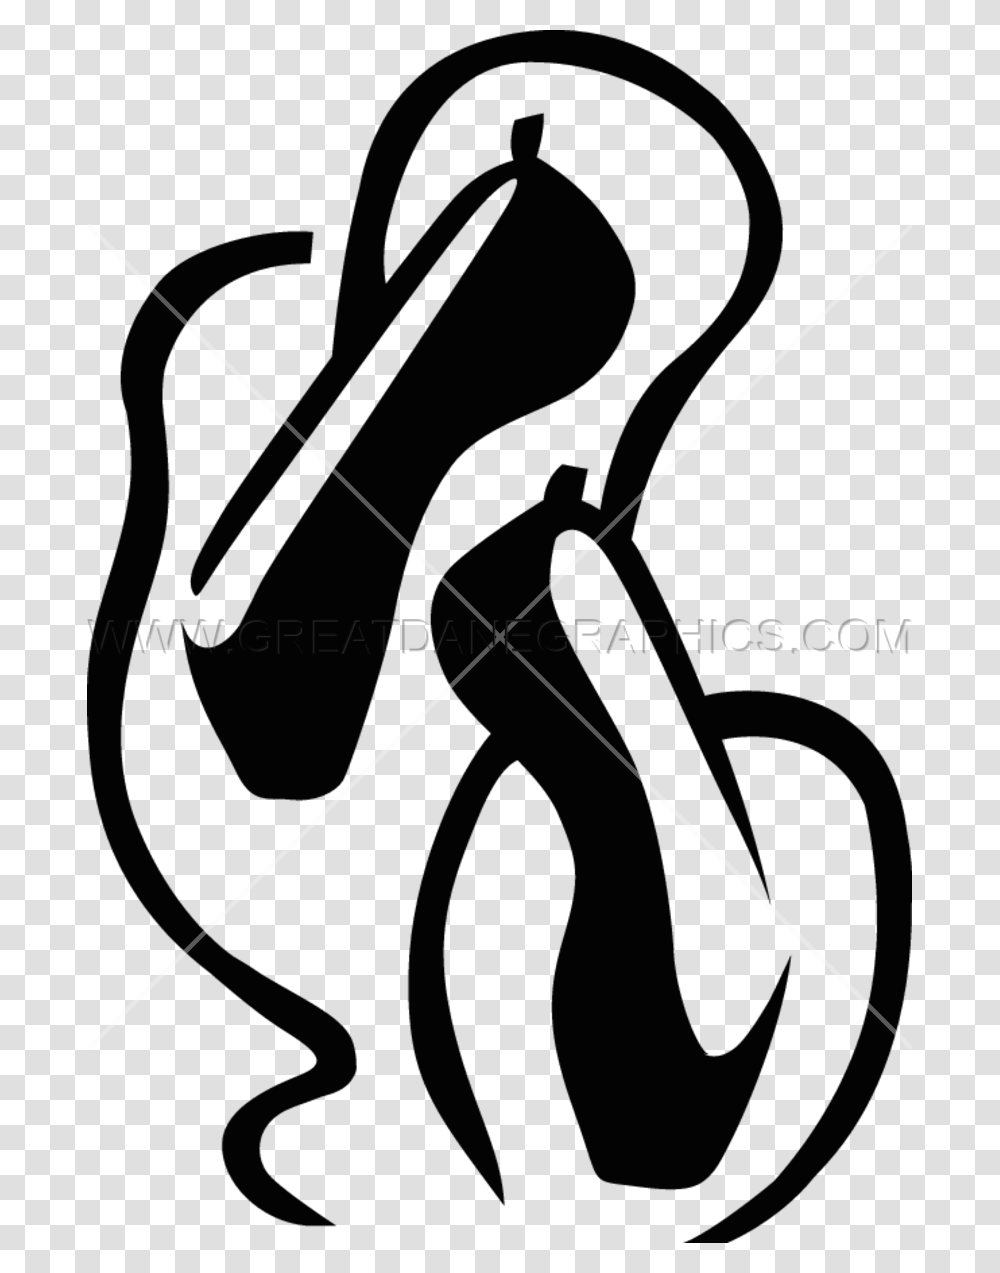 Ballet Shoes Production Ready Artwork For T Shirt Printing, Bicycle, Vehicle Transparent Png